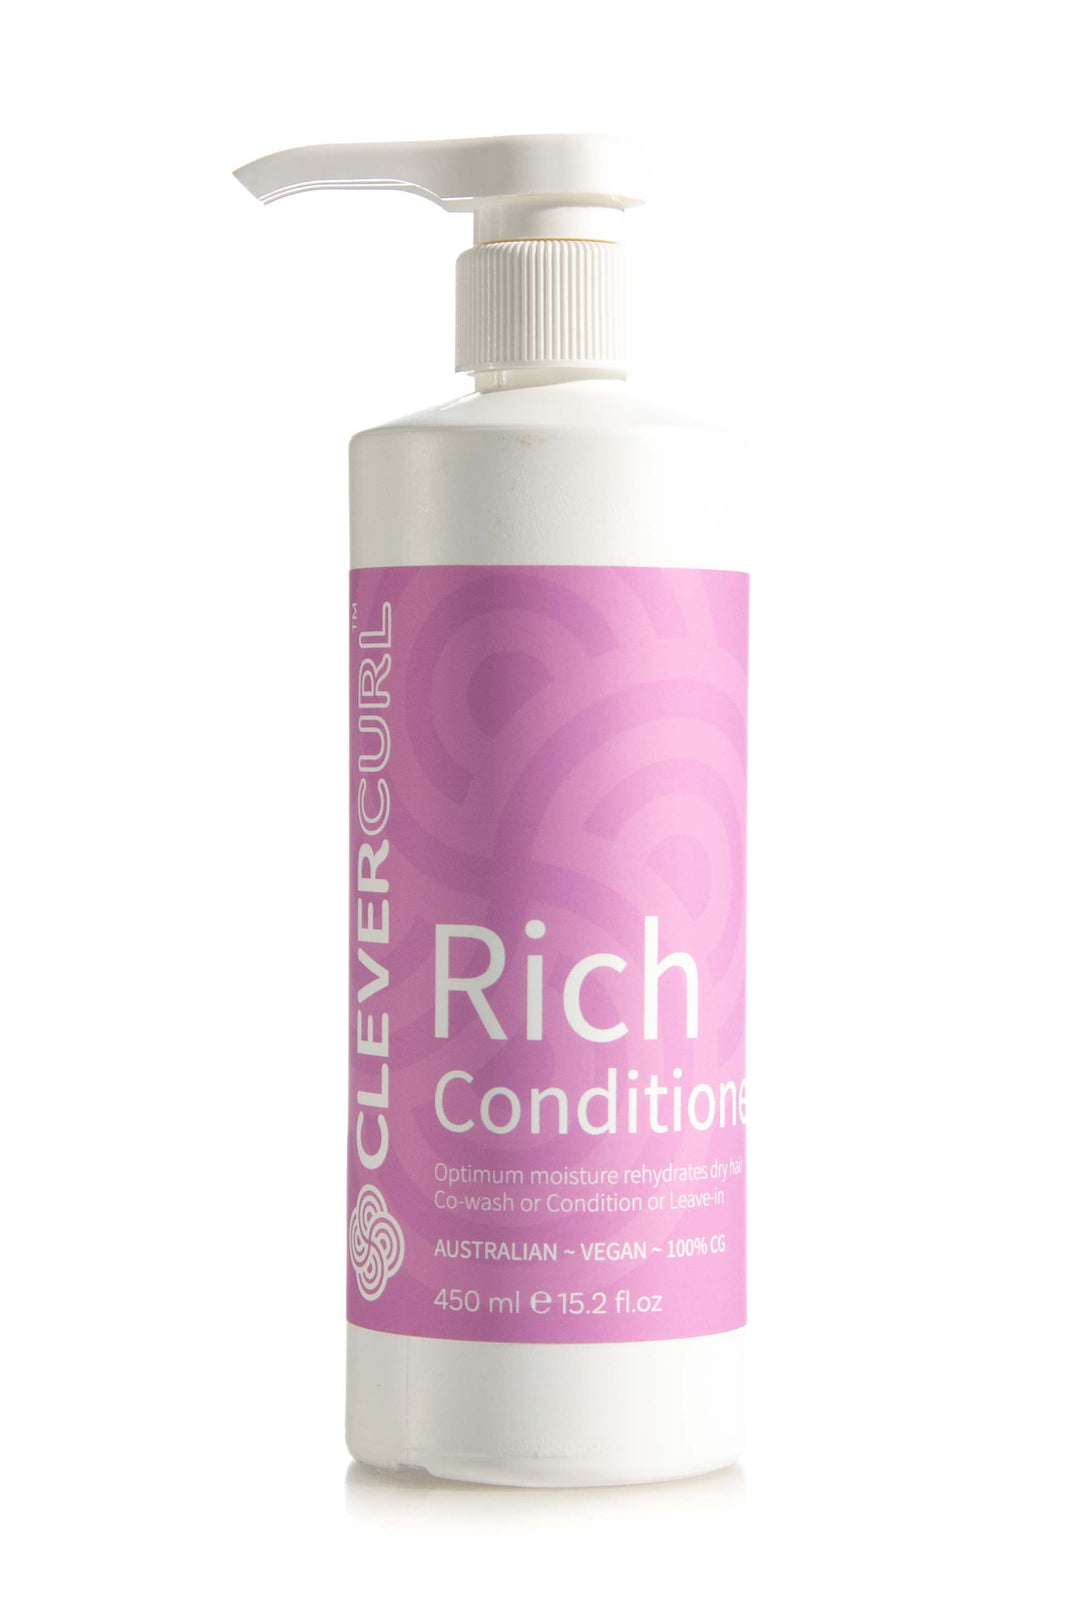 Product Image: Clever Curl Rich Conditioner - 450ml